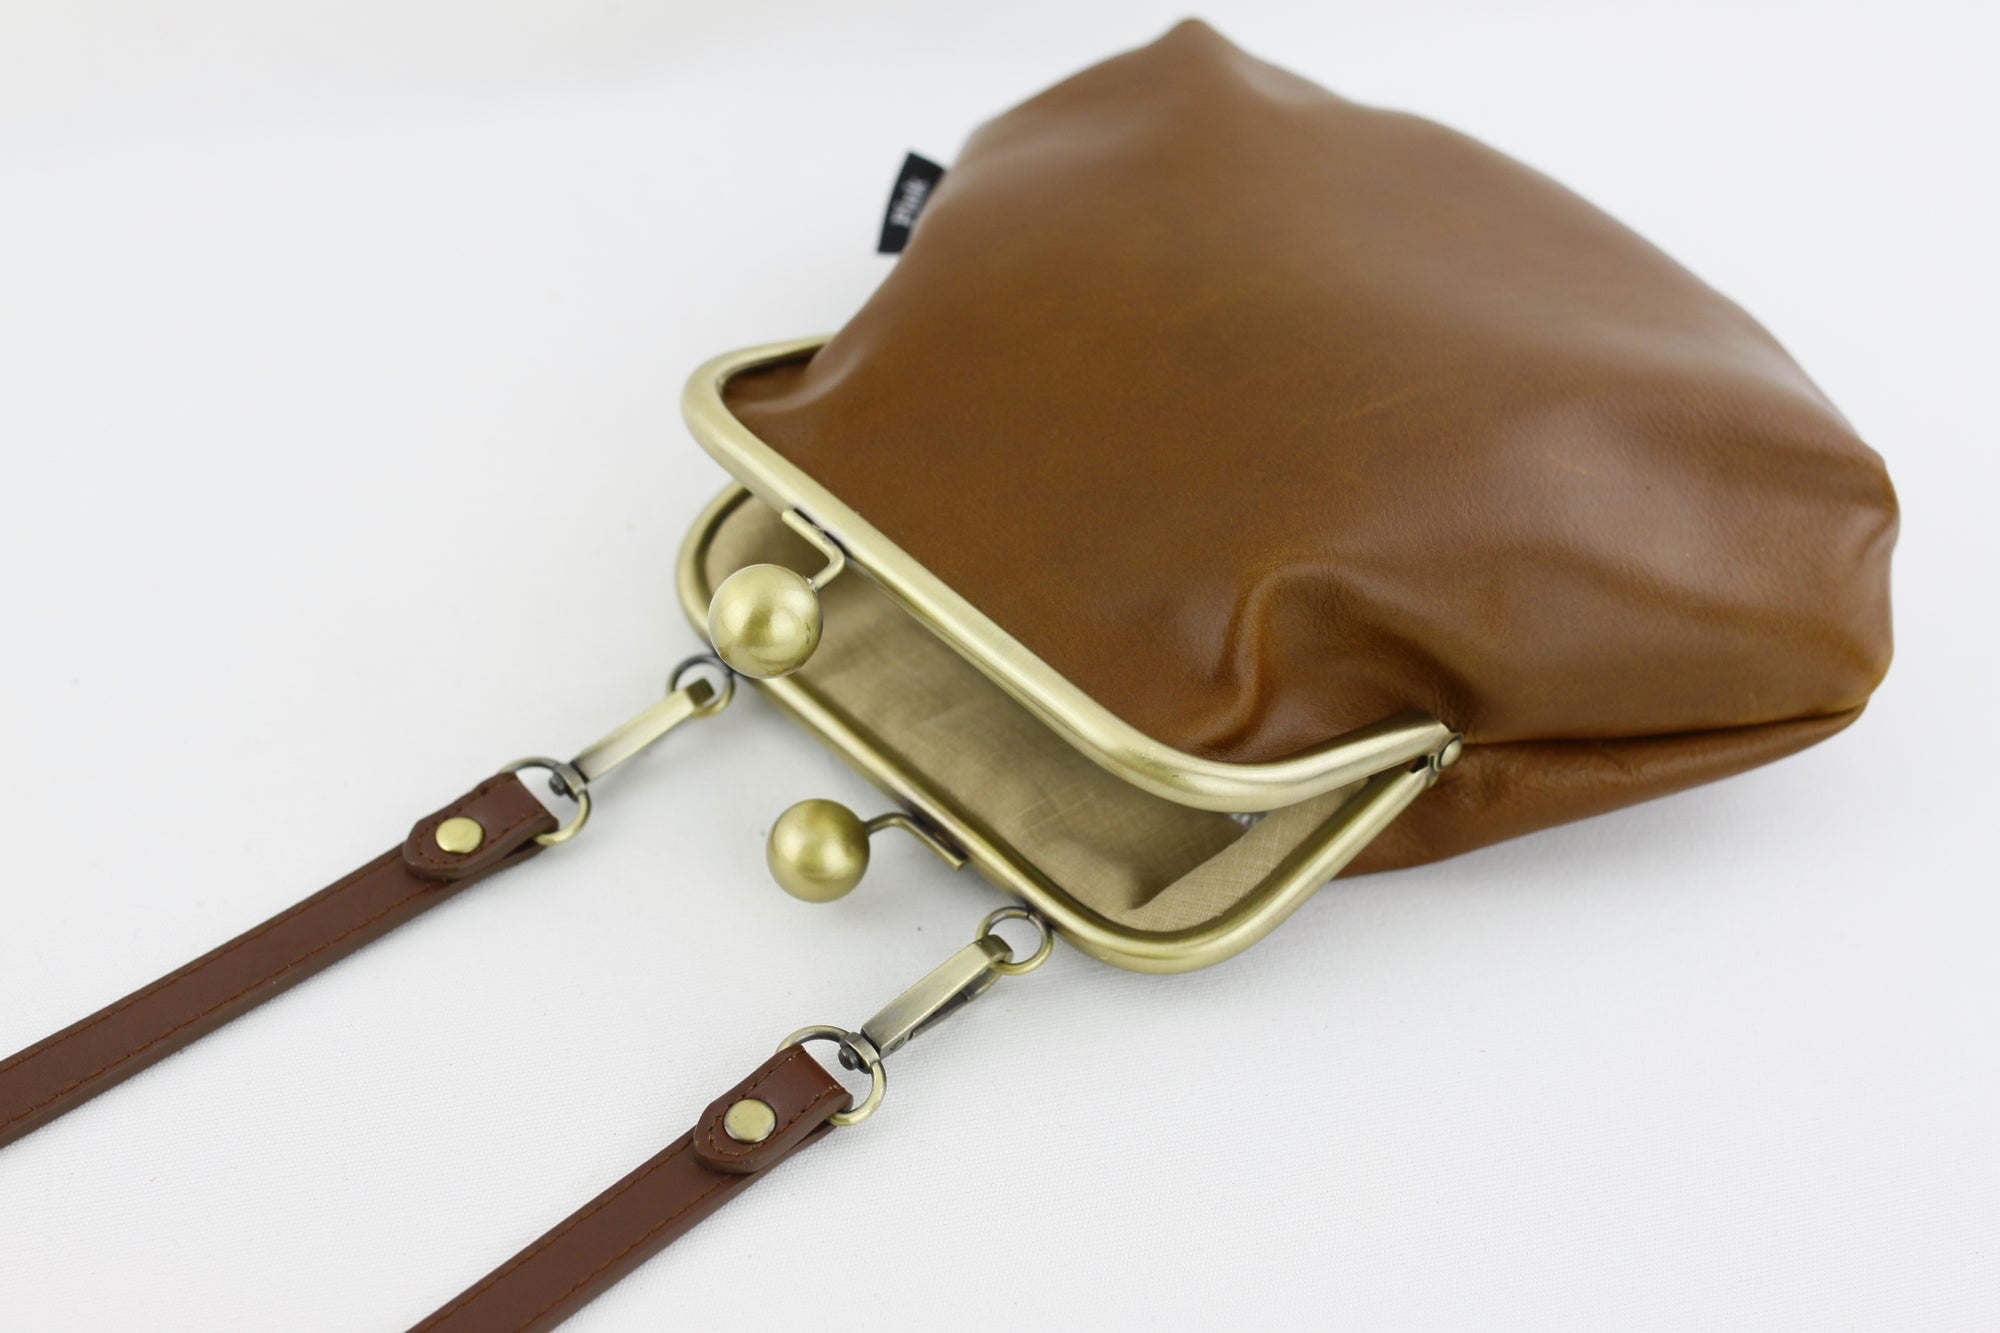 Chestnut Genuine Leather Clutch Bag with Strap | PINKOASIS